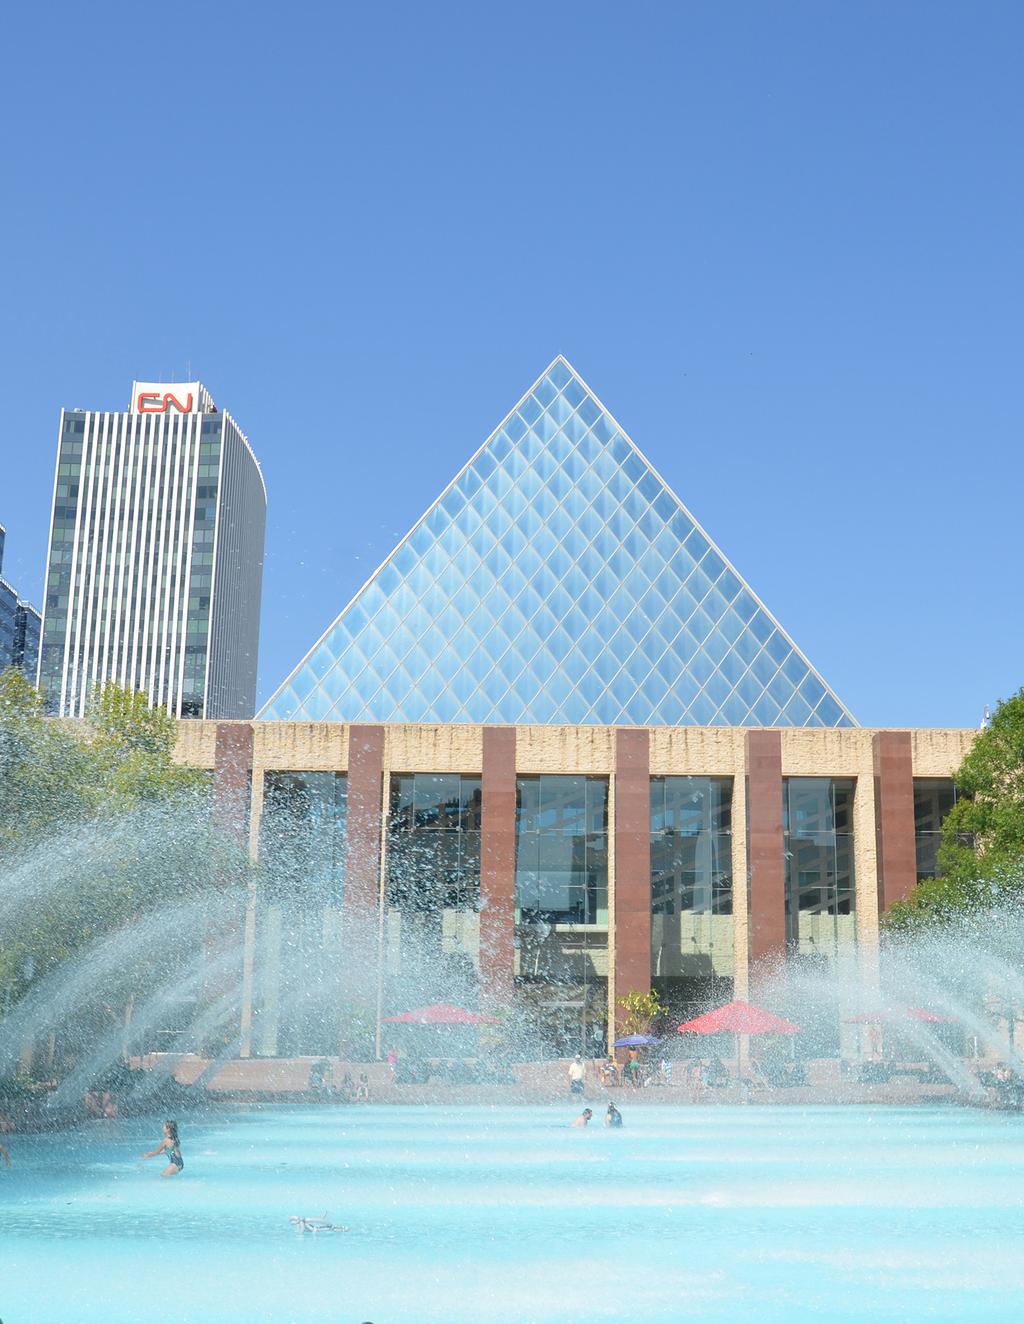 My vision for #yeg is open and effective local government & open data